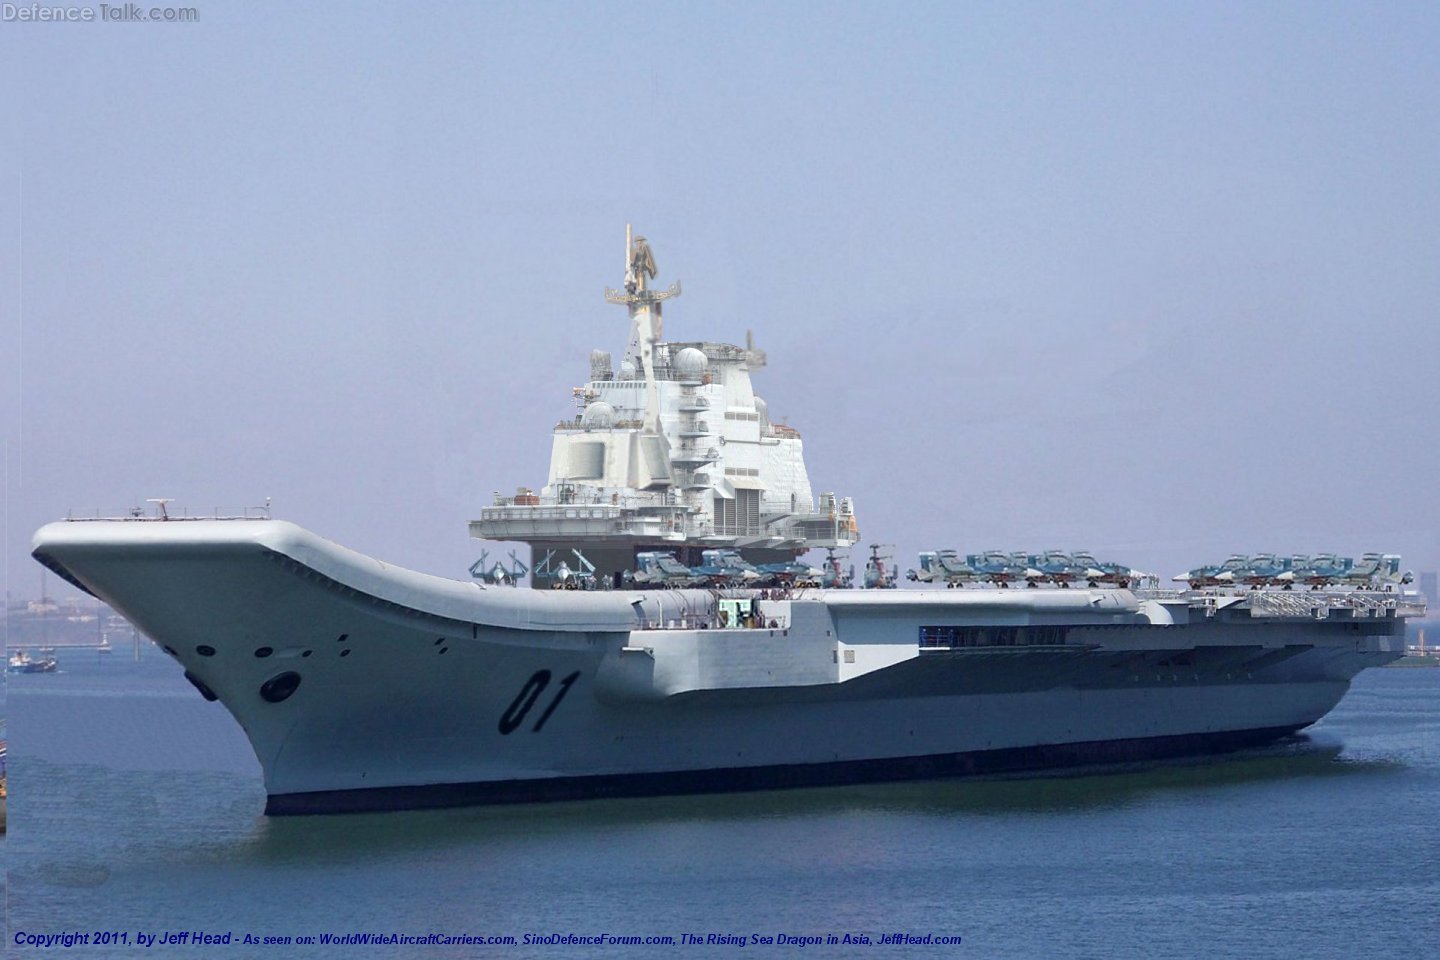 Artist conception of the new Chinese carrier